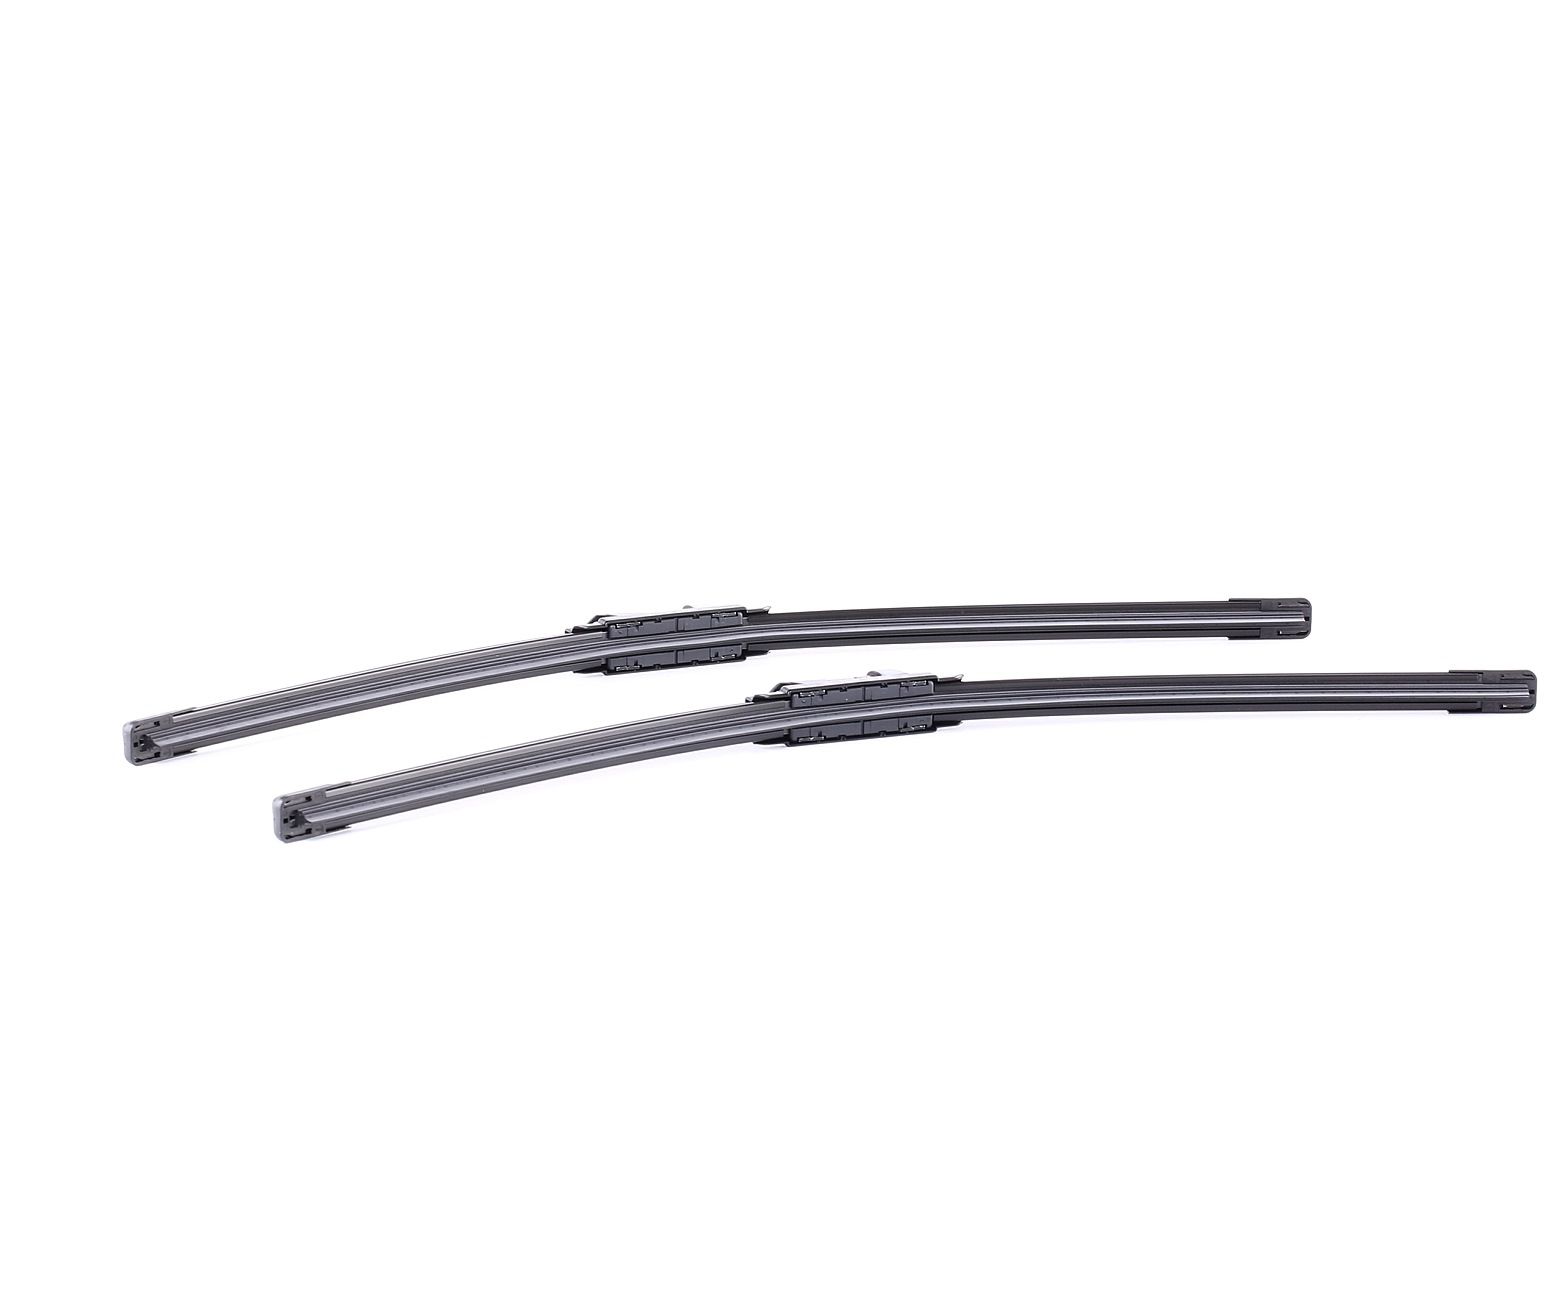 A 798 S BOSCH Aerotwin 530 mm, Beam, for left-hand drive vehicles Left-/right-hand drive vehicles: for left-hand drive vehicles Wiper blades 3 397 009 798 buy